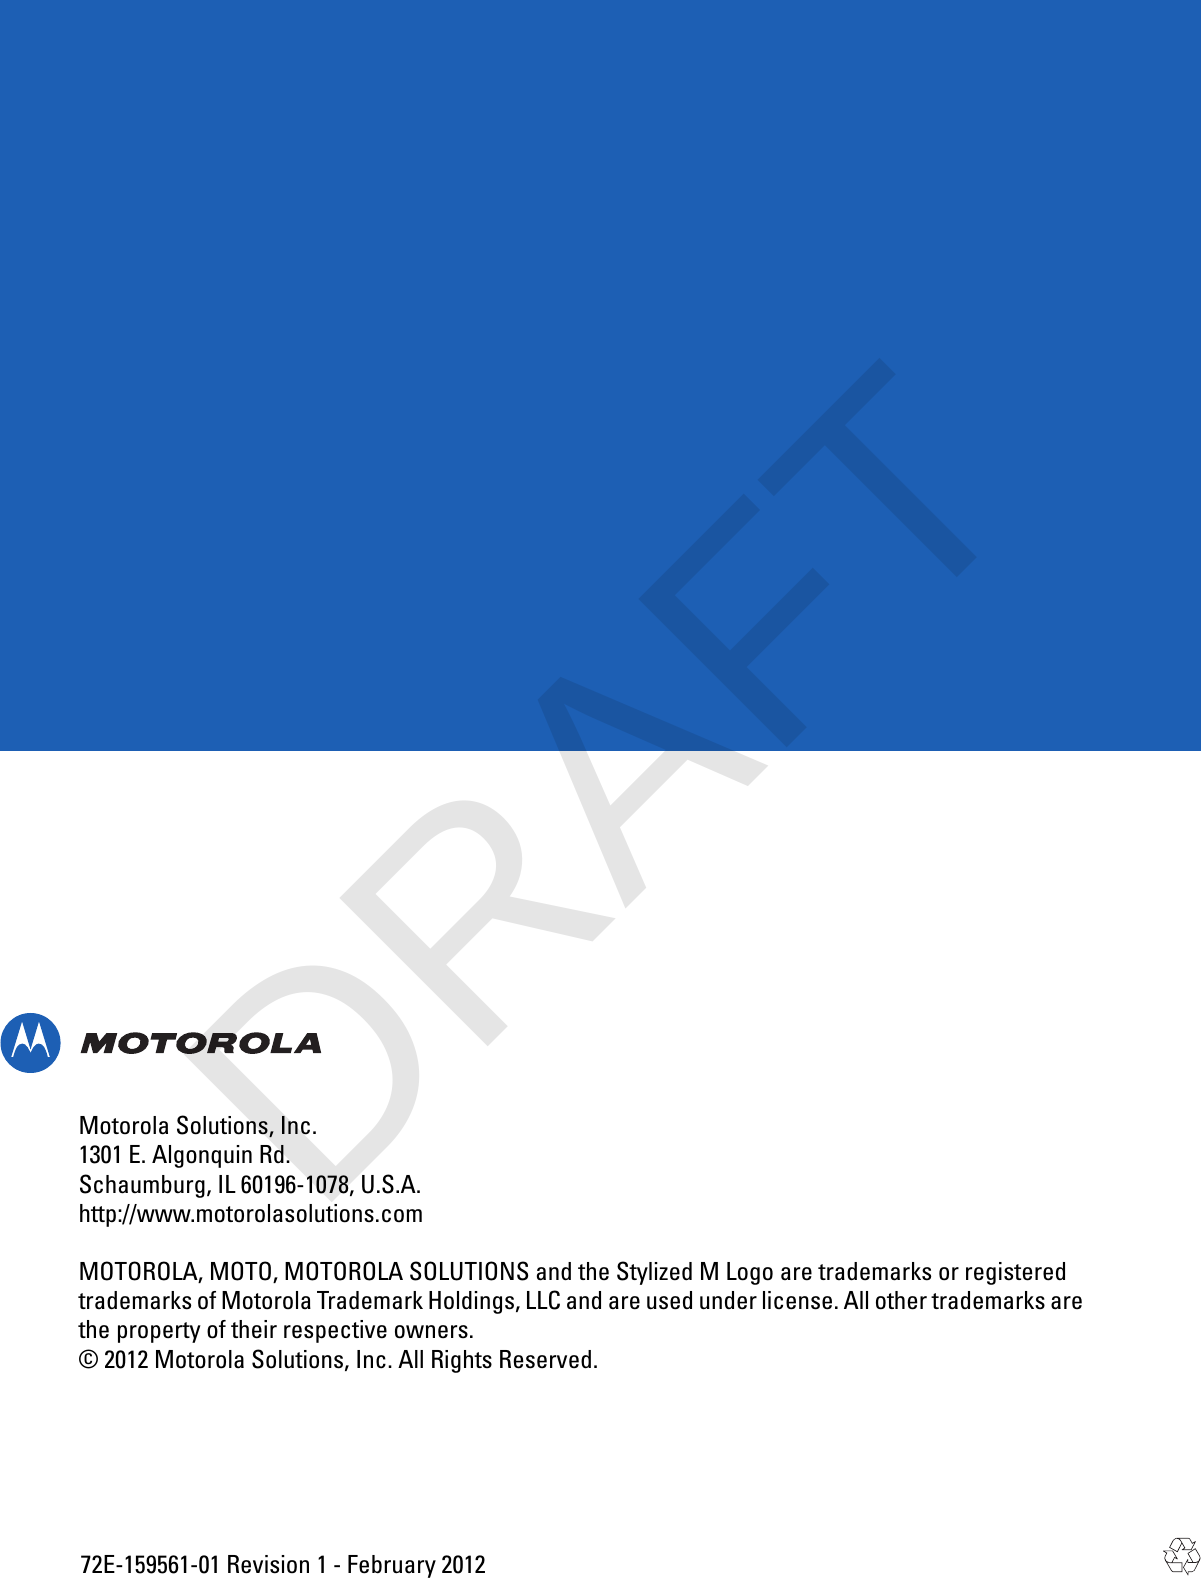 Motorola Solutions, Inc.1301 E. Algonquin Rd.Schaumburg, IL 60196-1078, U.S.A.http://www.motorolasolutions.comMOTOROLA, MOTO, MOTOROLA SOLUTIONS and the Stylized M Logo are trademarks or registeredtrademarks of Motorola Trademark Holdings, LLC and are used under license. All other trademarks arethe property of their respective owners.© 2012 Motorola Solutions, Inc. All Rights Reserved.72E-159561-01 Revision 1 - February 2012DRAFT